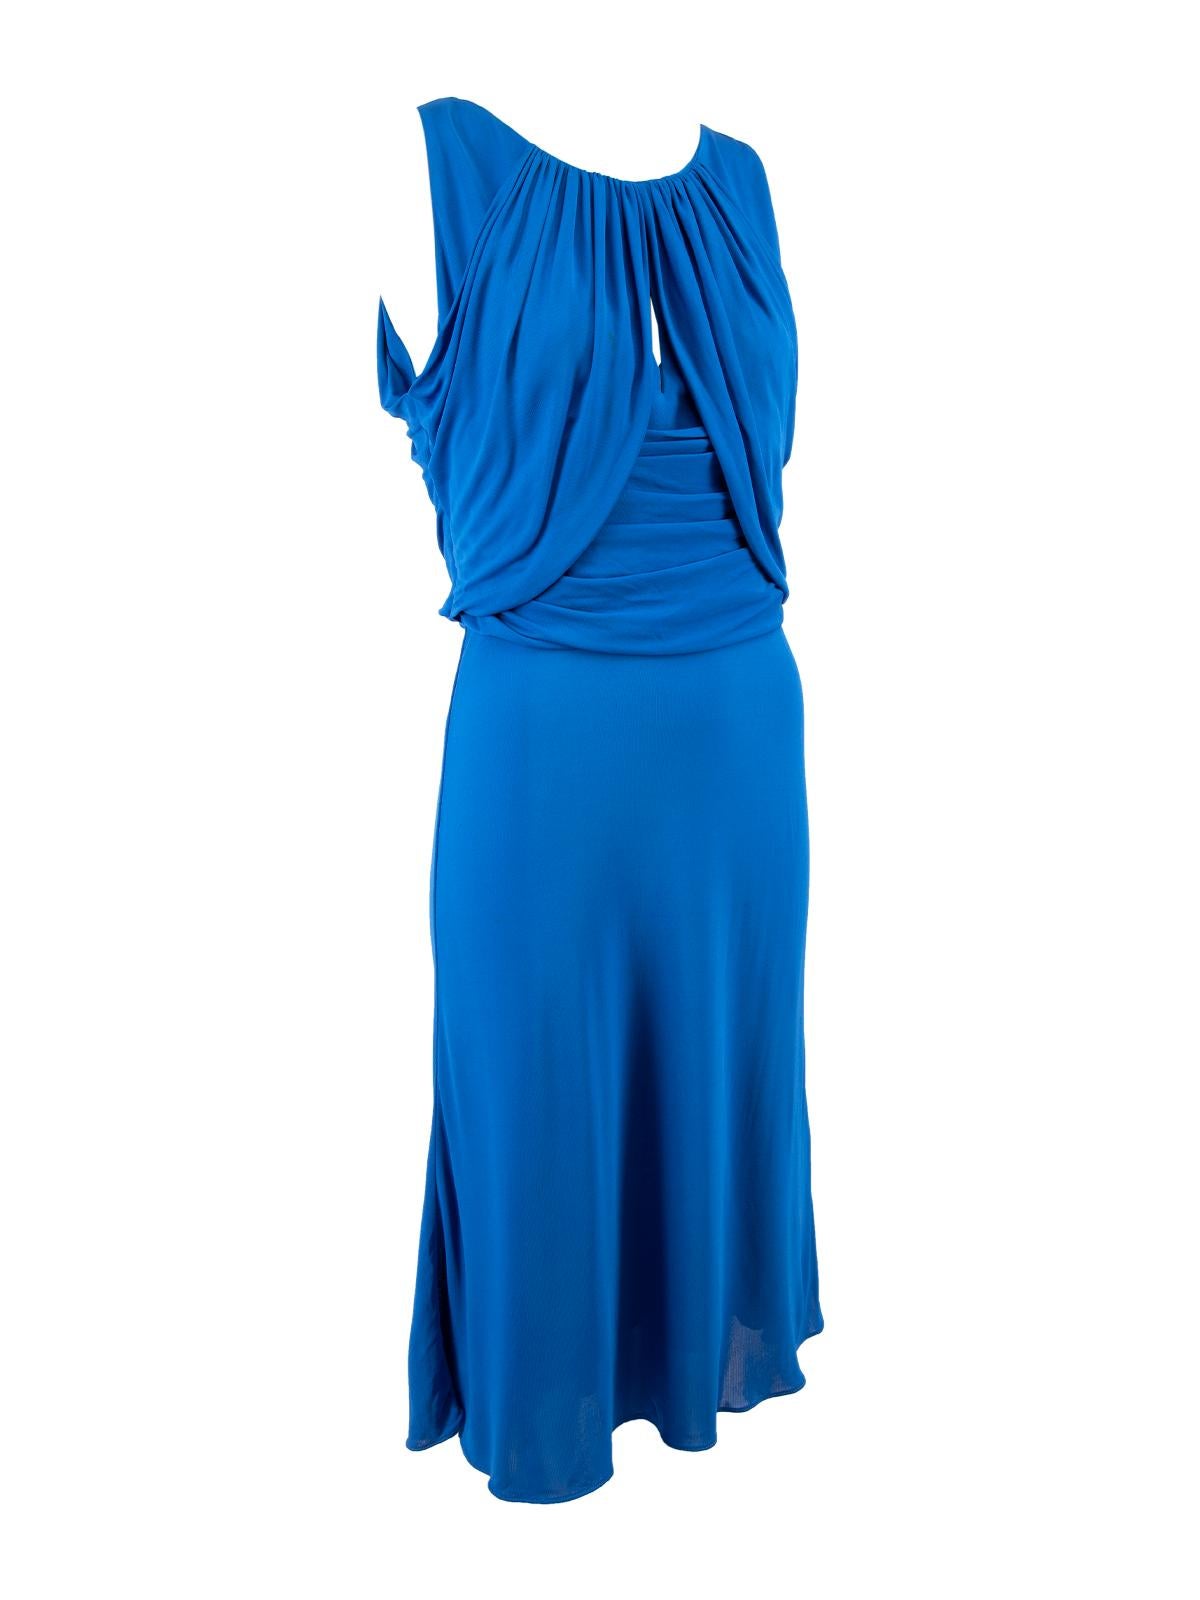 CONDITION is Very good. Hardly any wear to dress is evident. Light stains to neckline, possibly caused by makeup, and small stain on right breast on this used Versace designer resale item. Details Cobalt blue Viscose Acetate lining Round neck